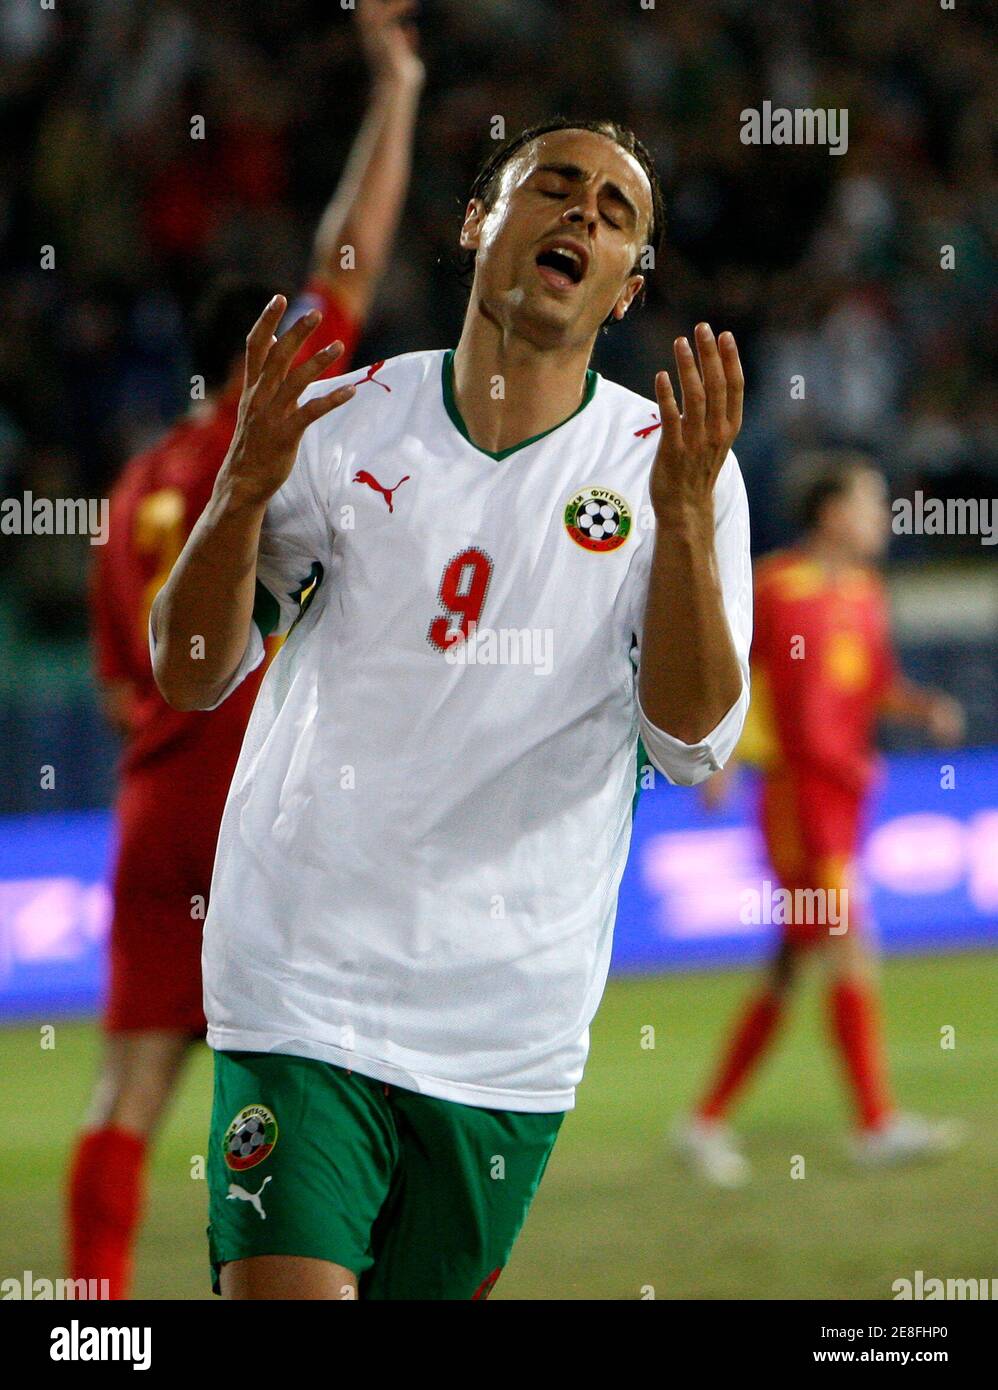 Dimitar Berbatov of Bulgaria reacts during their World Cup 2010 qualifying soccer match against Montenegro in Sofia September 5, 2009. REUTERS/Oleg Popov (BULGARIA SPORT SOCCER) Stock Photo